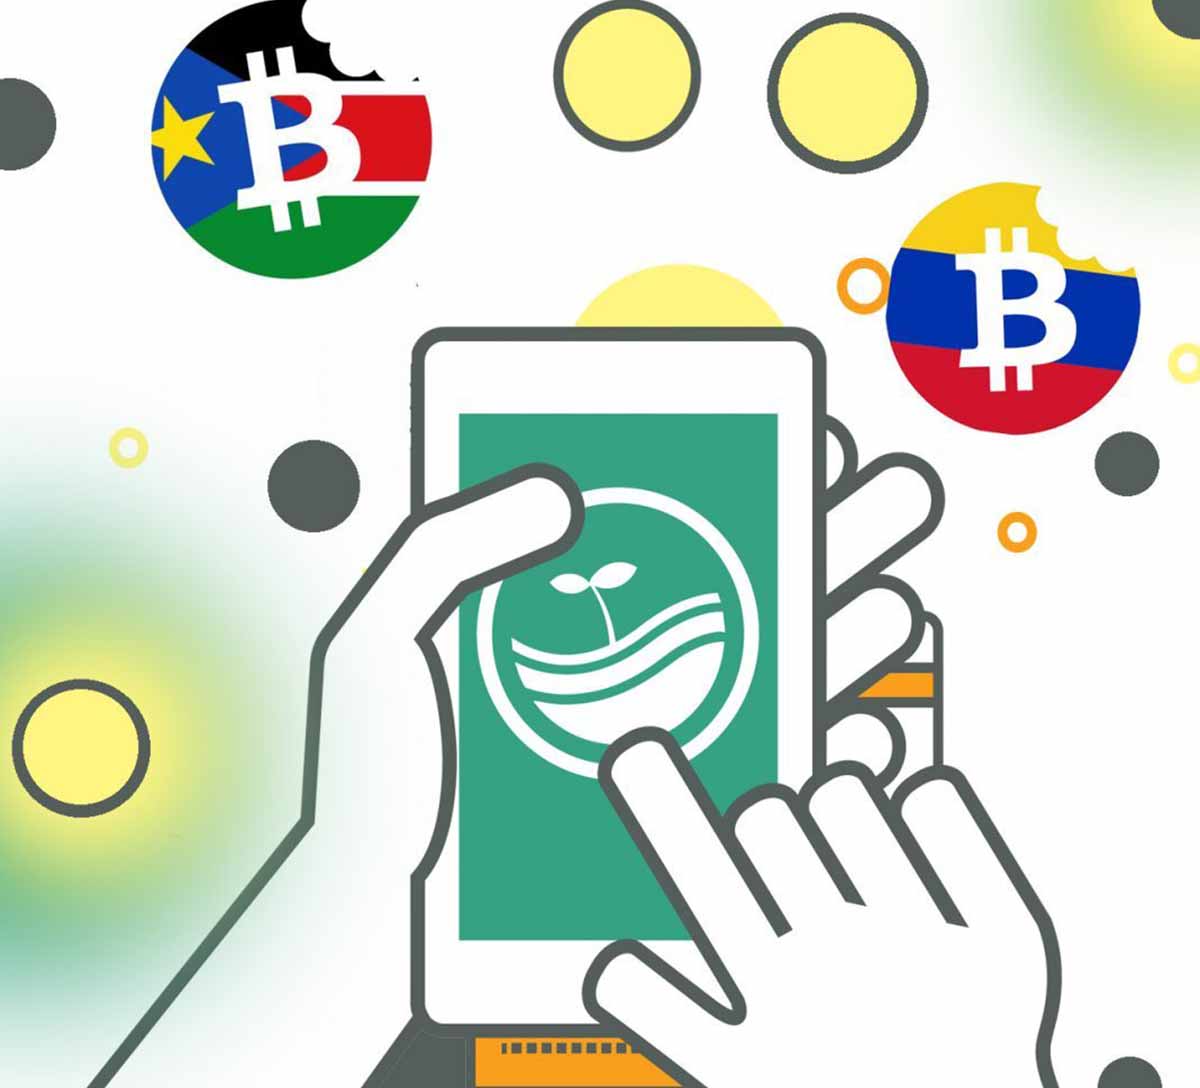 The Venezuelan entity based on charity operations with bitcoin cash extended last year to South Sudan